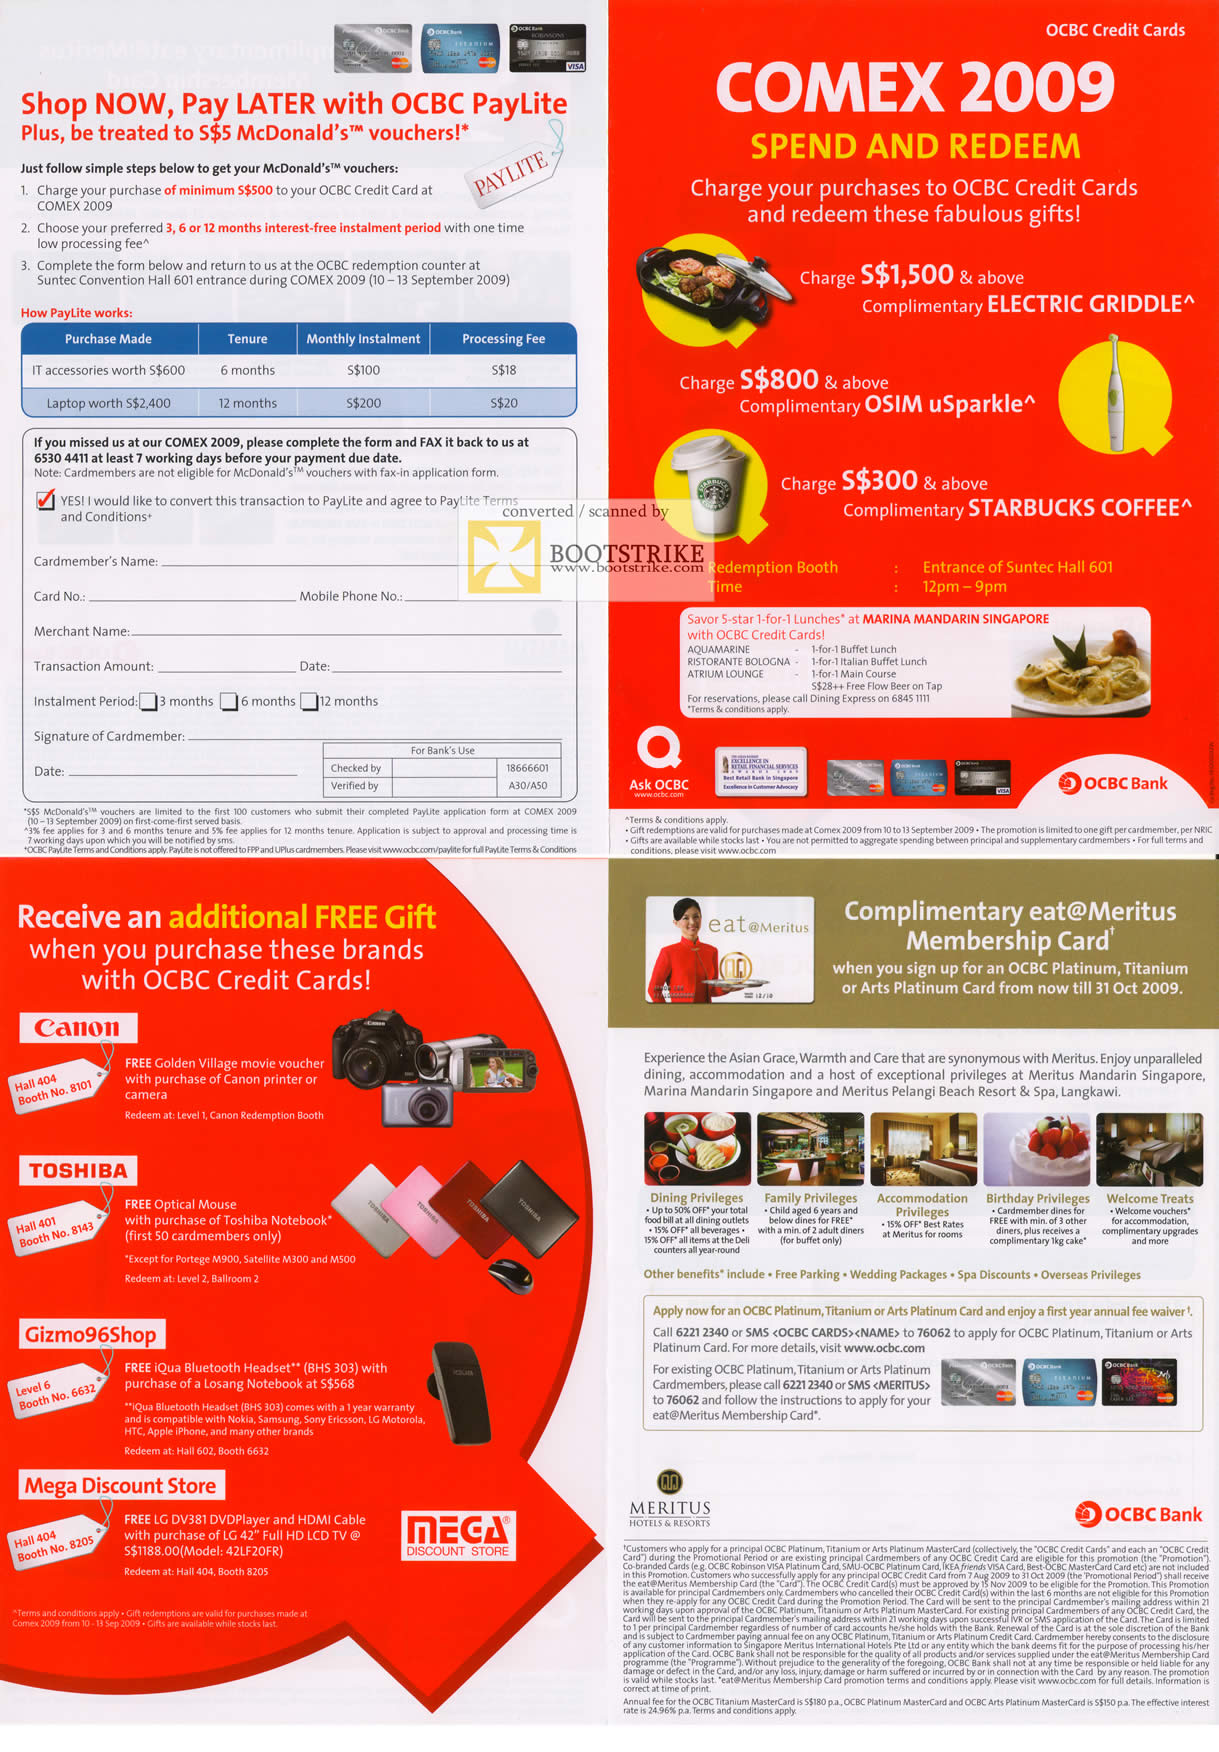 OCBC Credit Card Redemption Promotions COMEX 2009 Price List Brochure